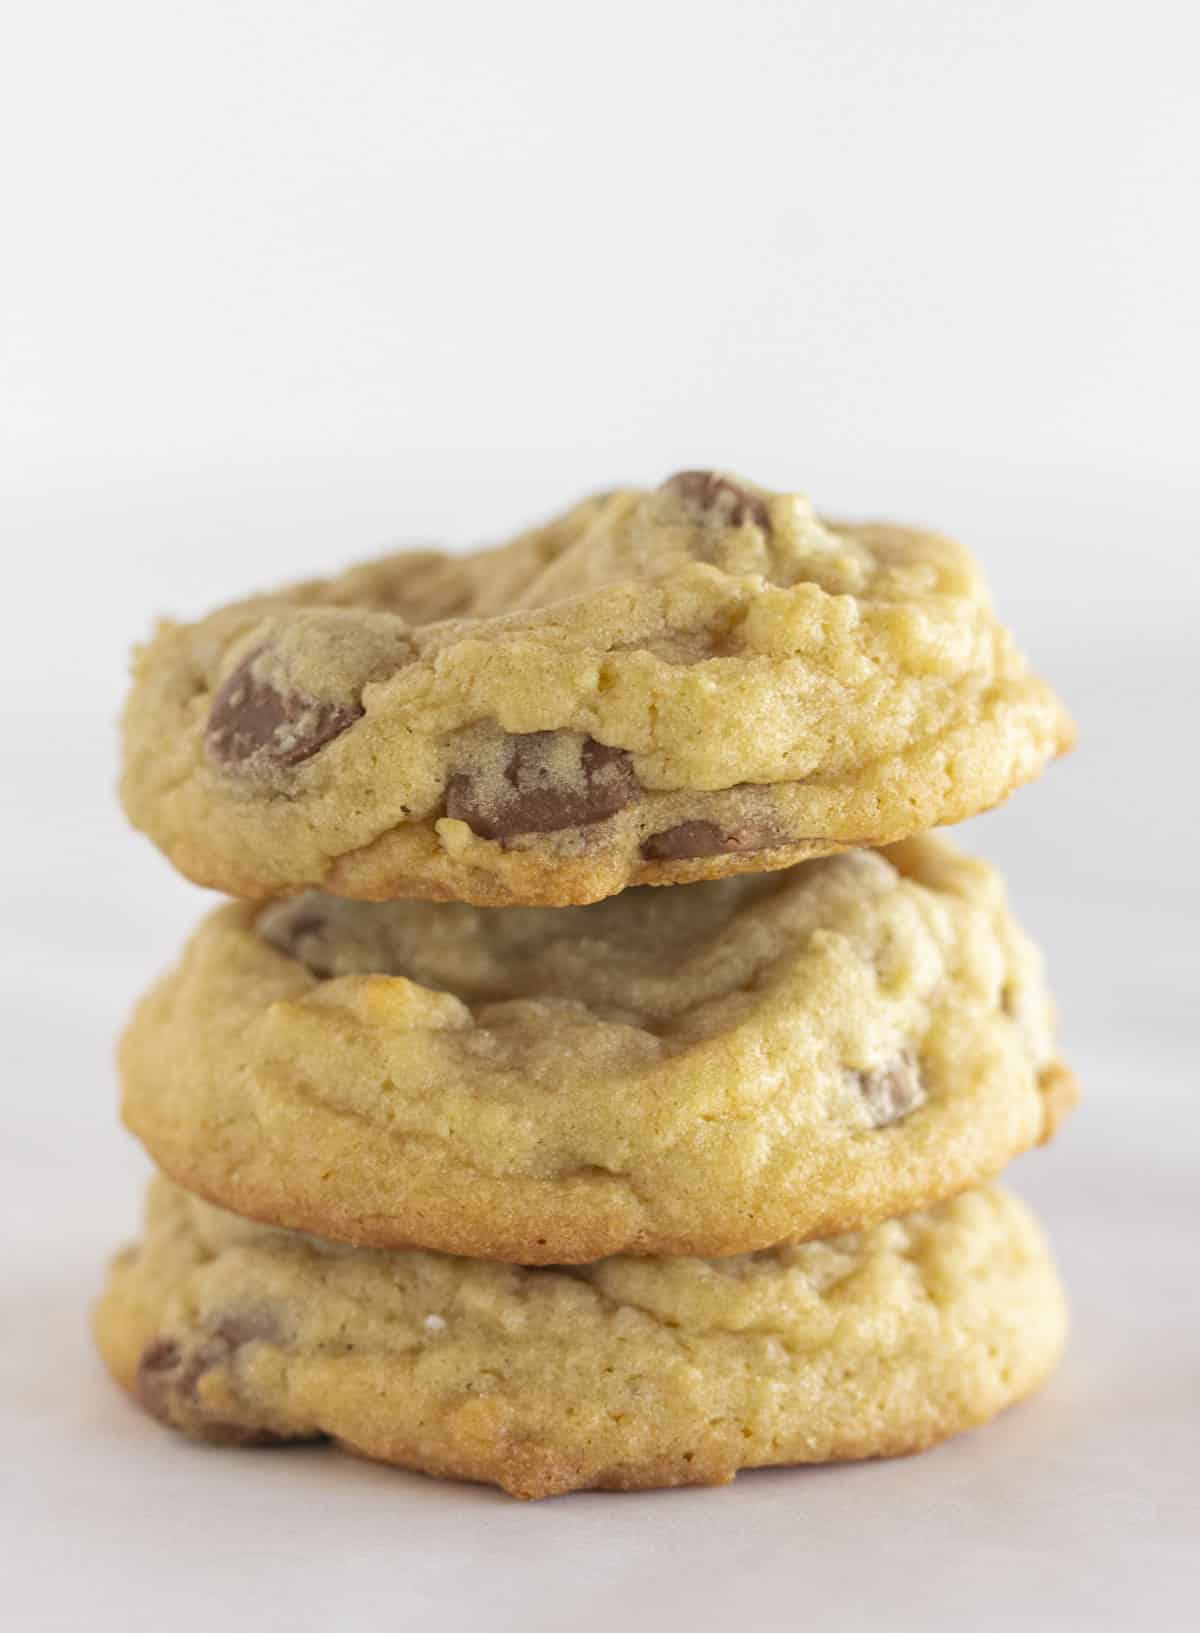 Three soft chocolate chip cookies stacked on top of each other.